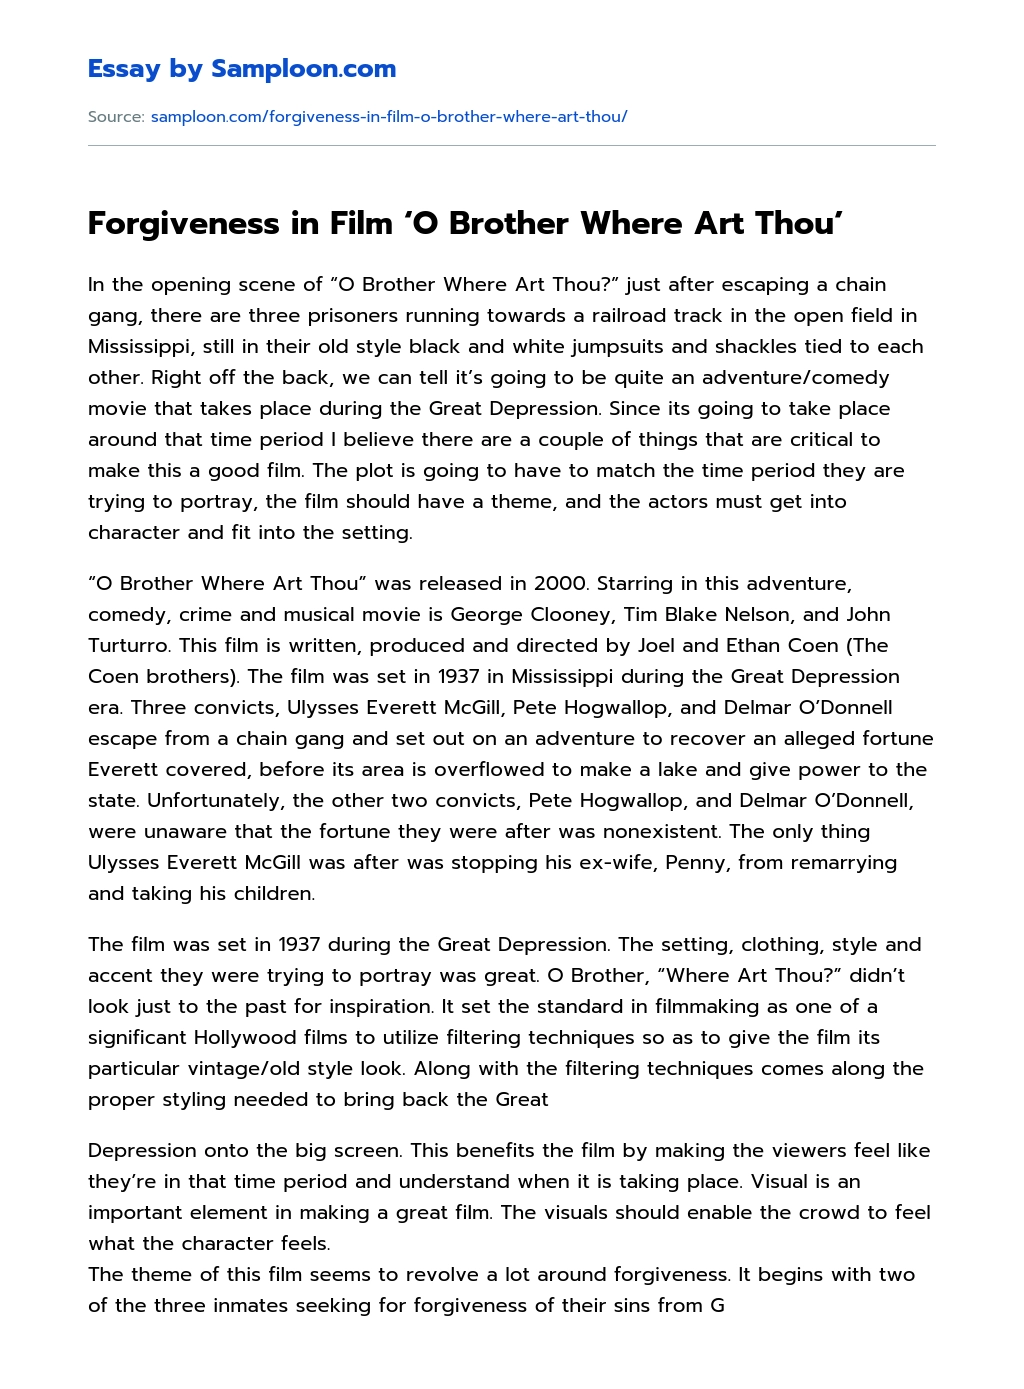 Forgiveness in Film ‘O Brother Where Art Thou’ Analytical Essay essay